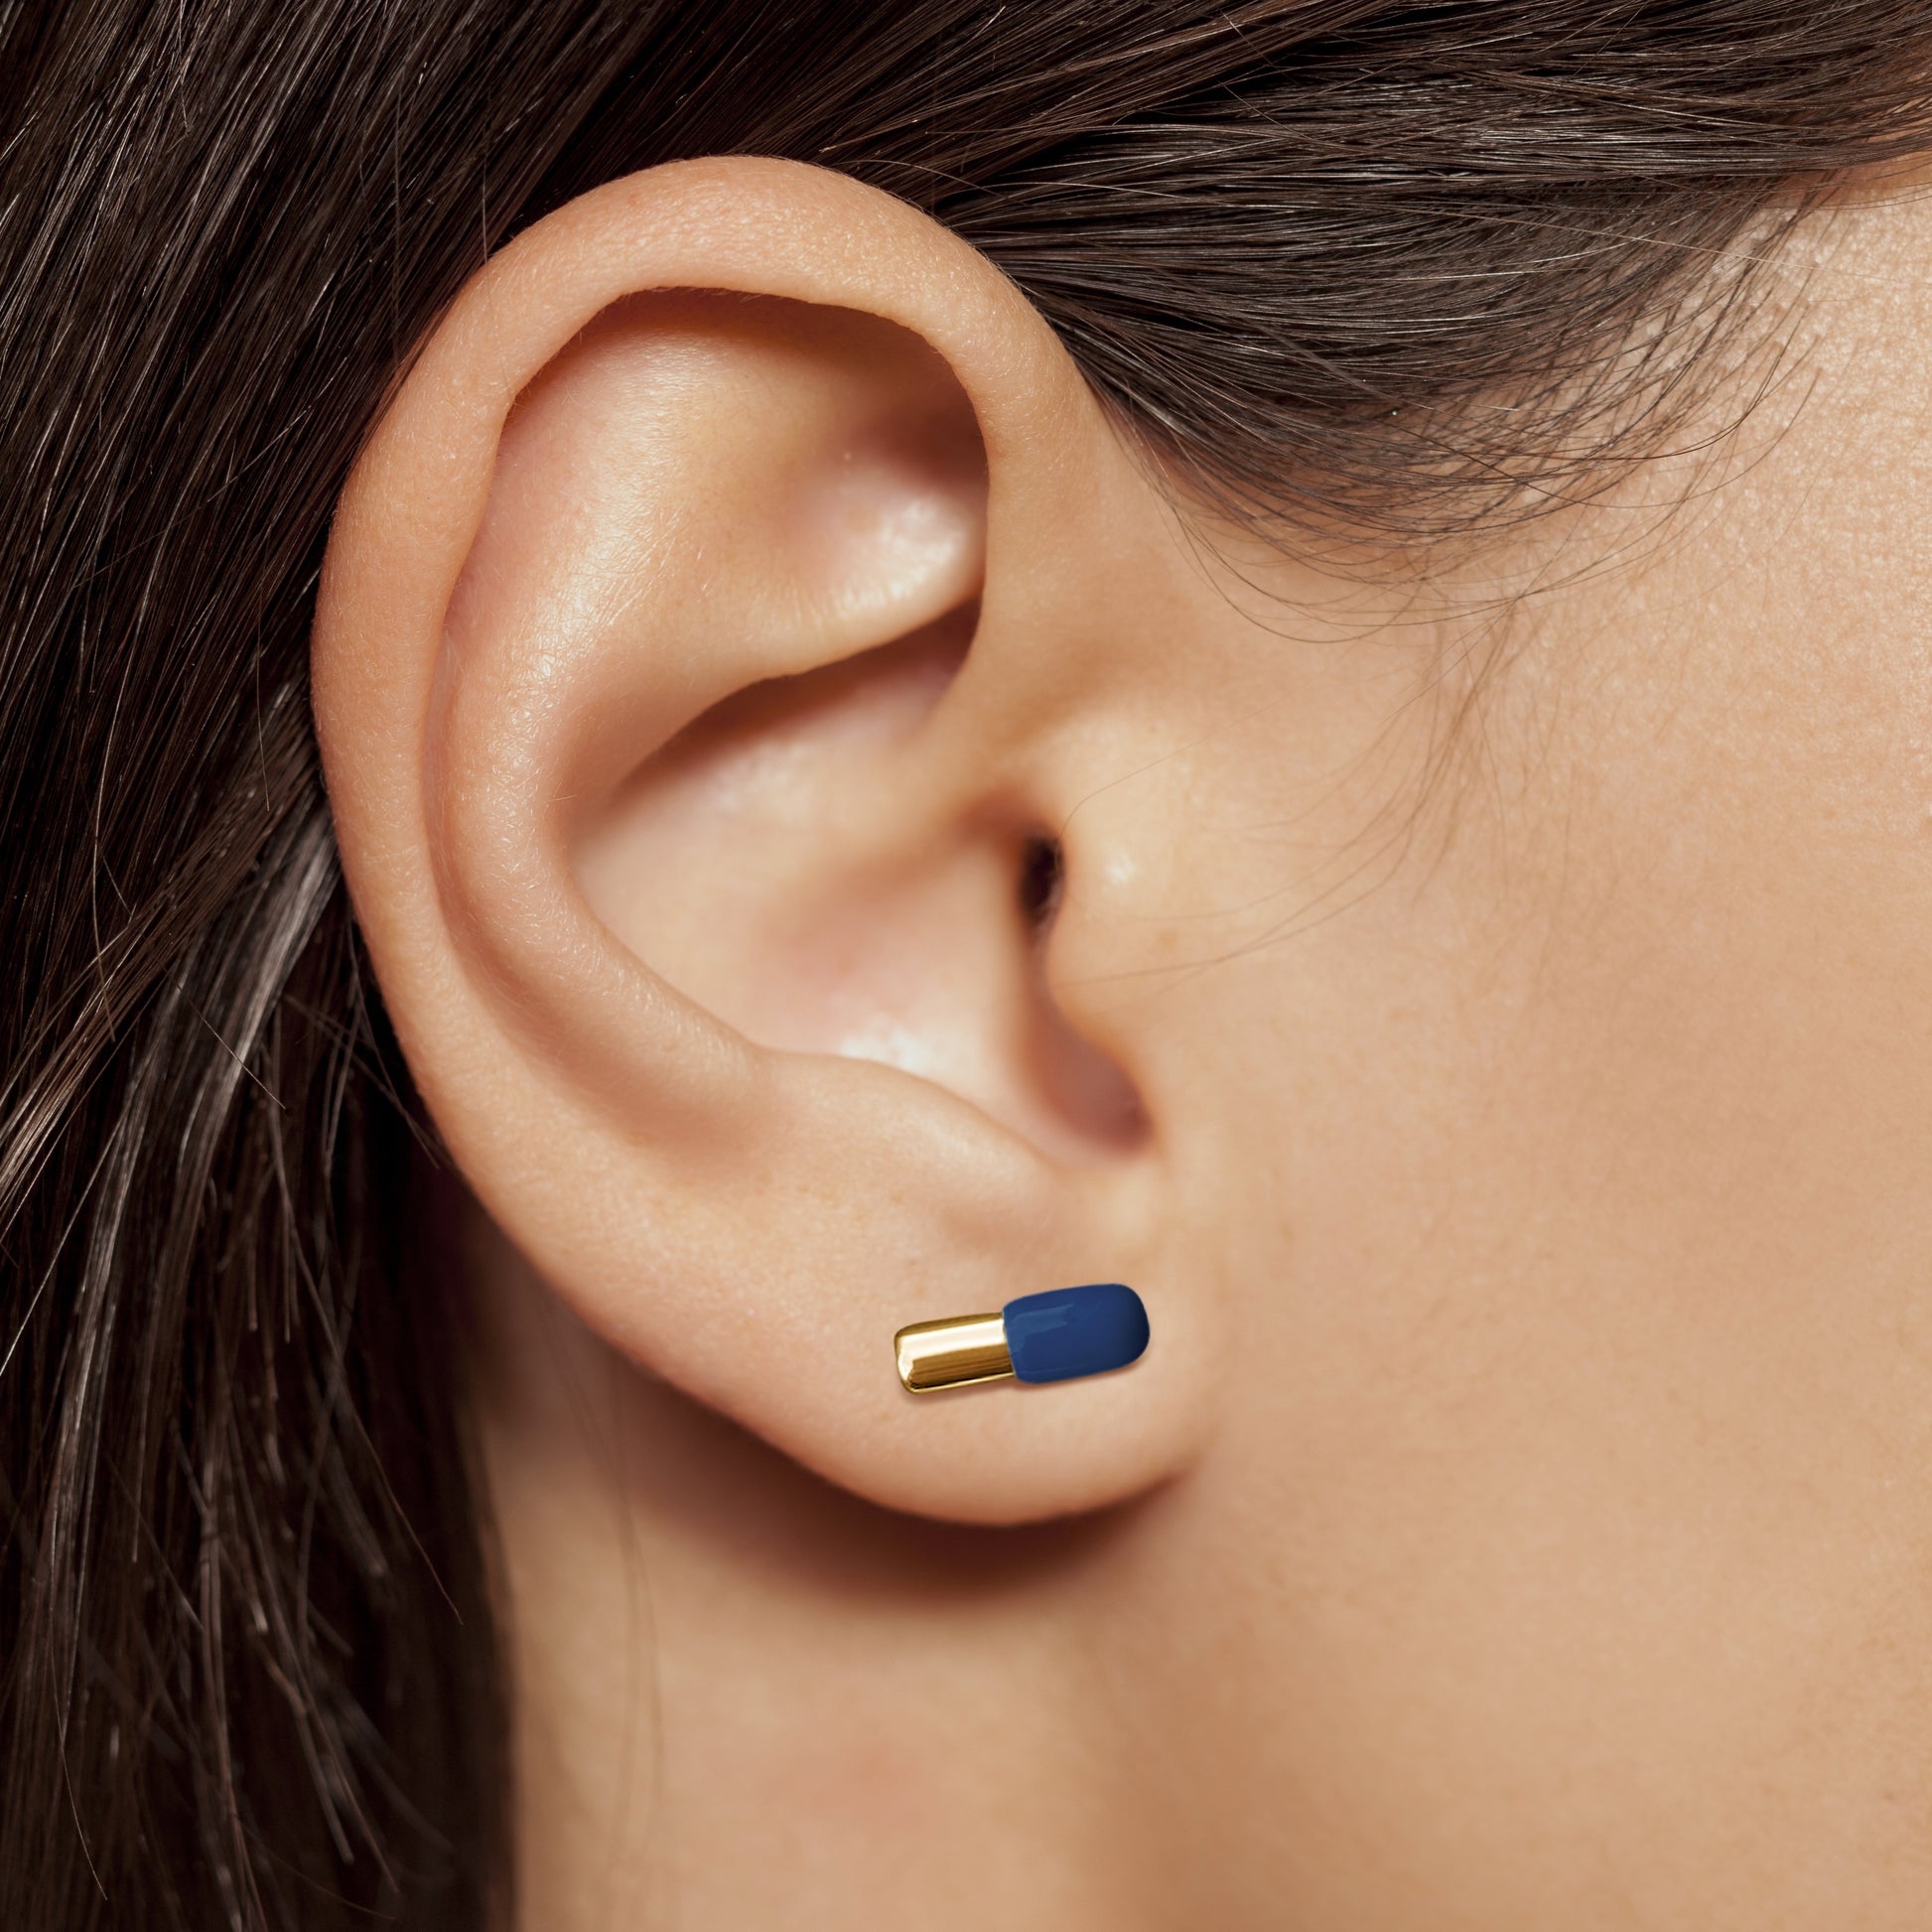 Pill earring in navy and rose gold in nurse model